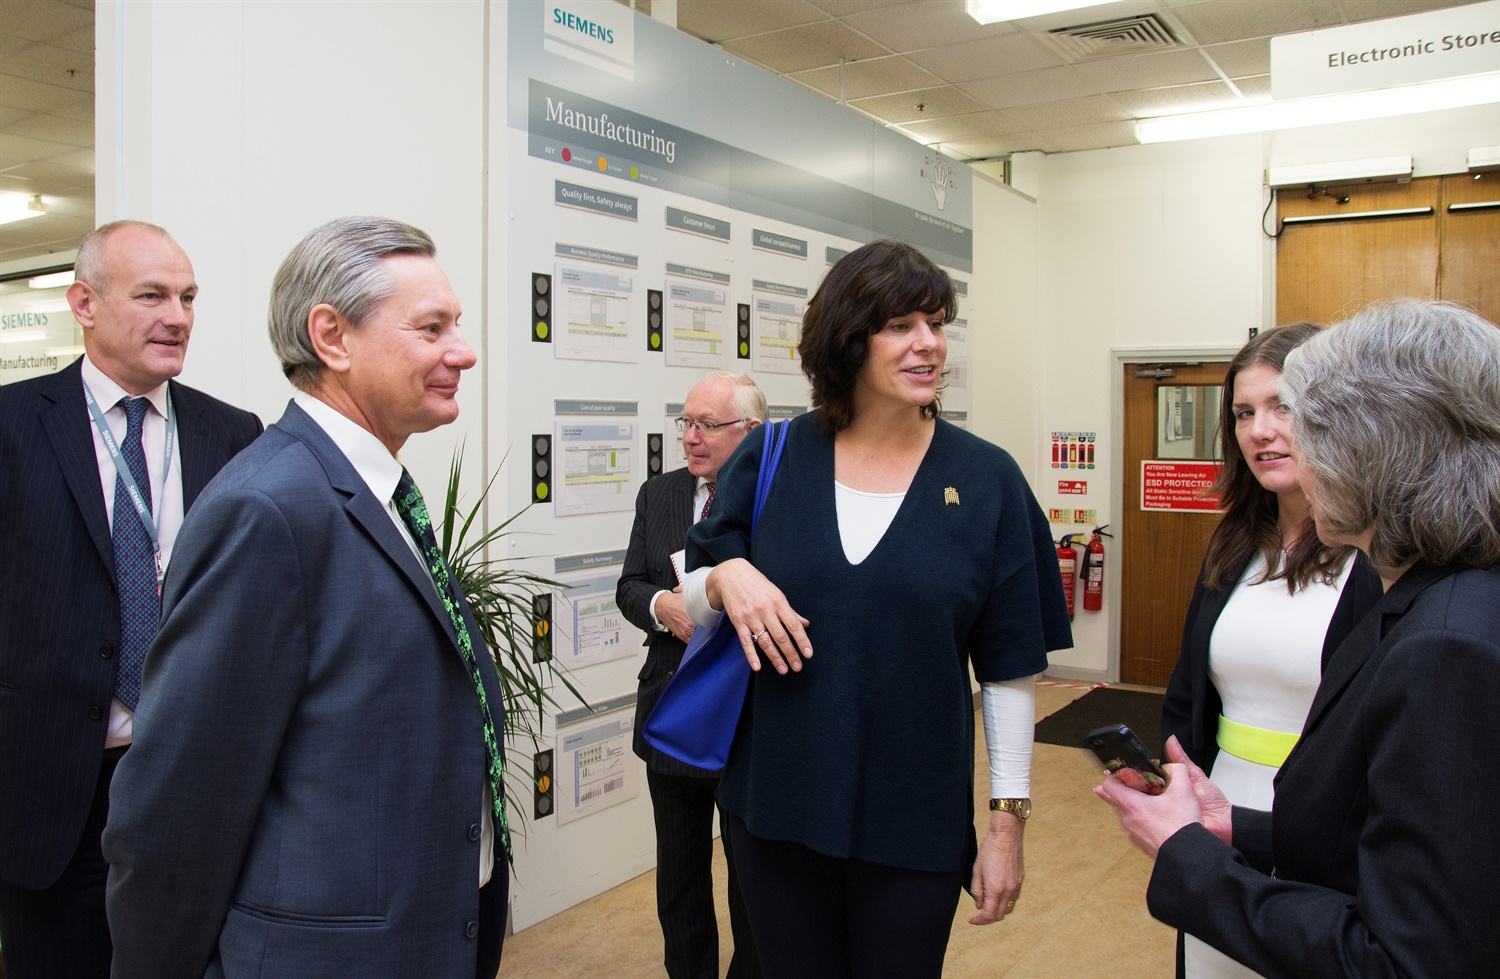 Siemens and Claire Perry talk future plans in Chippenham visit